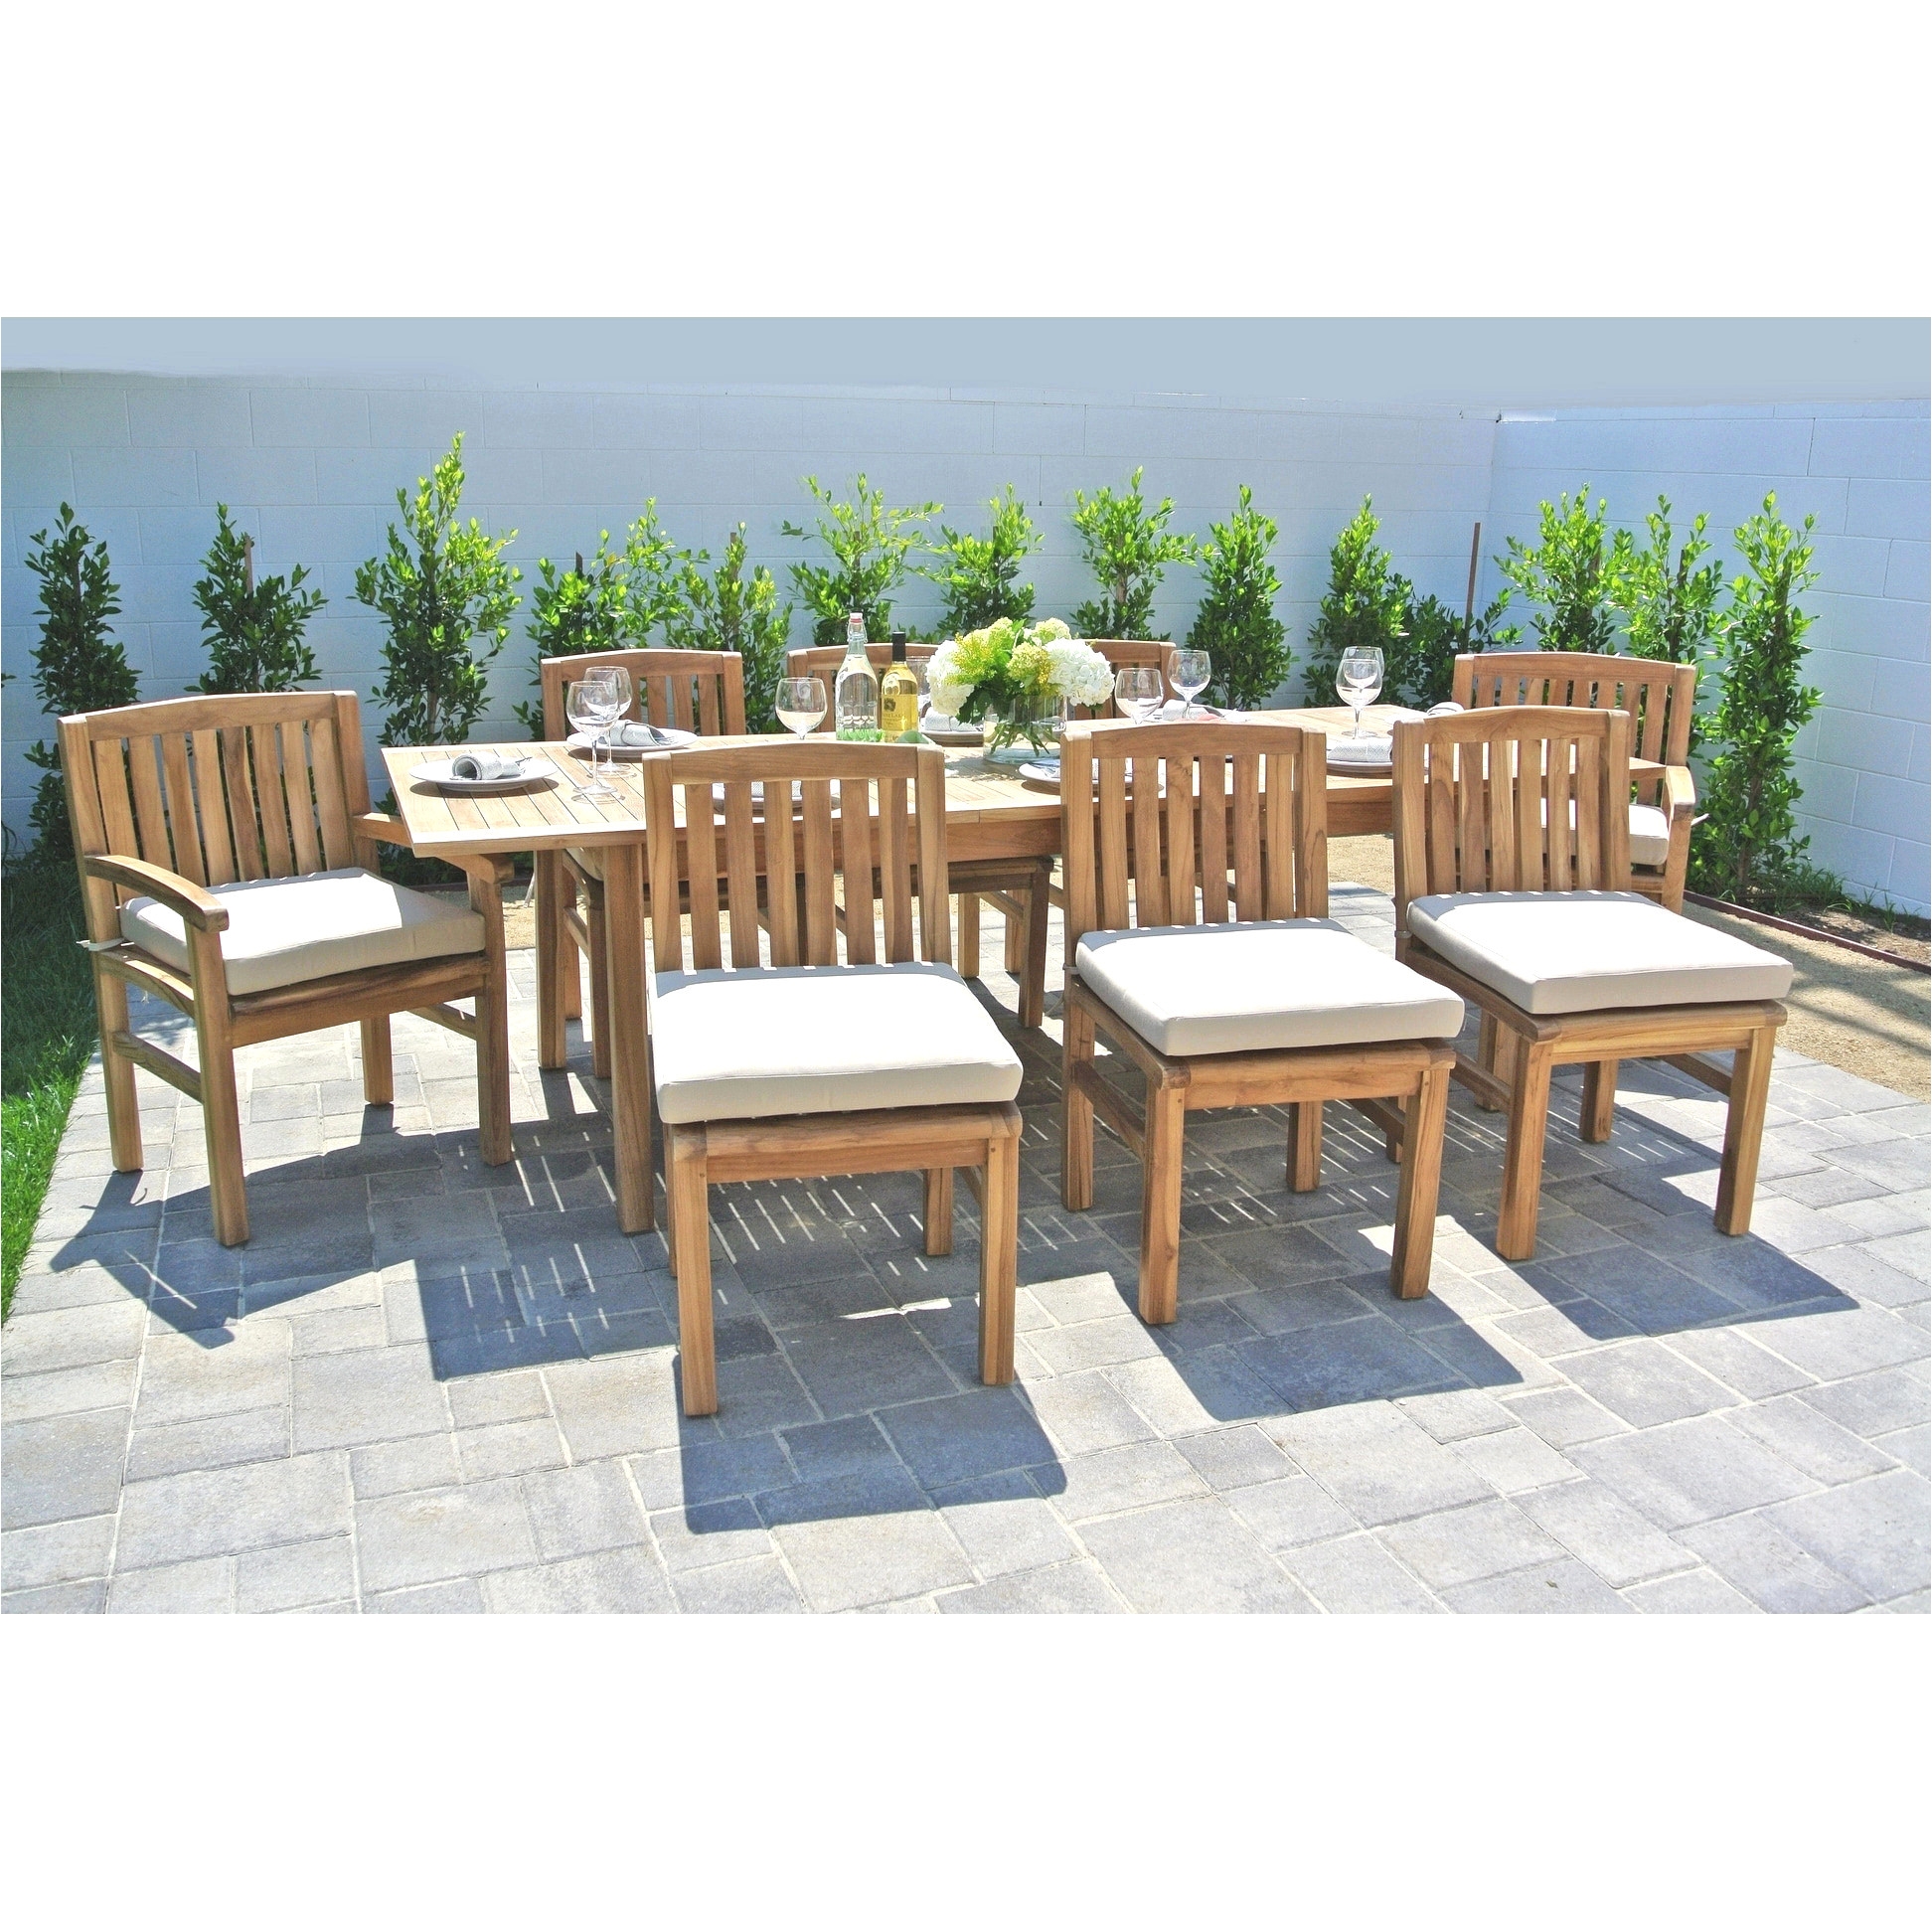 outdoor patio furniture sets menards latest patio box best wicker outdoor sofa 0d patio chairs